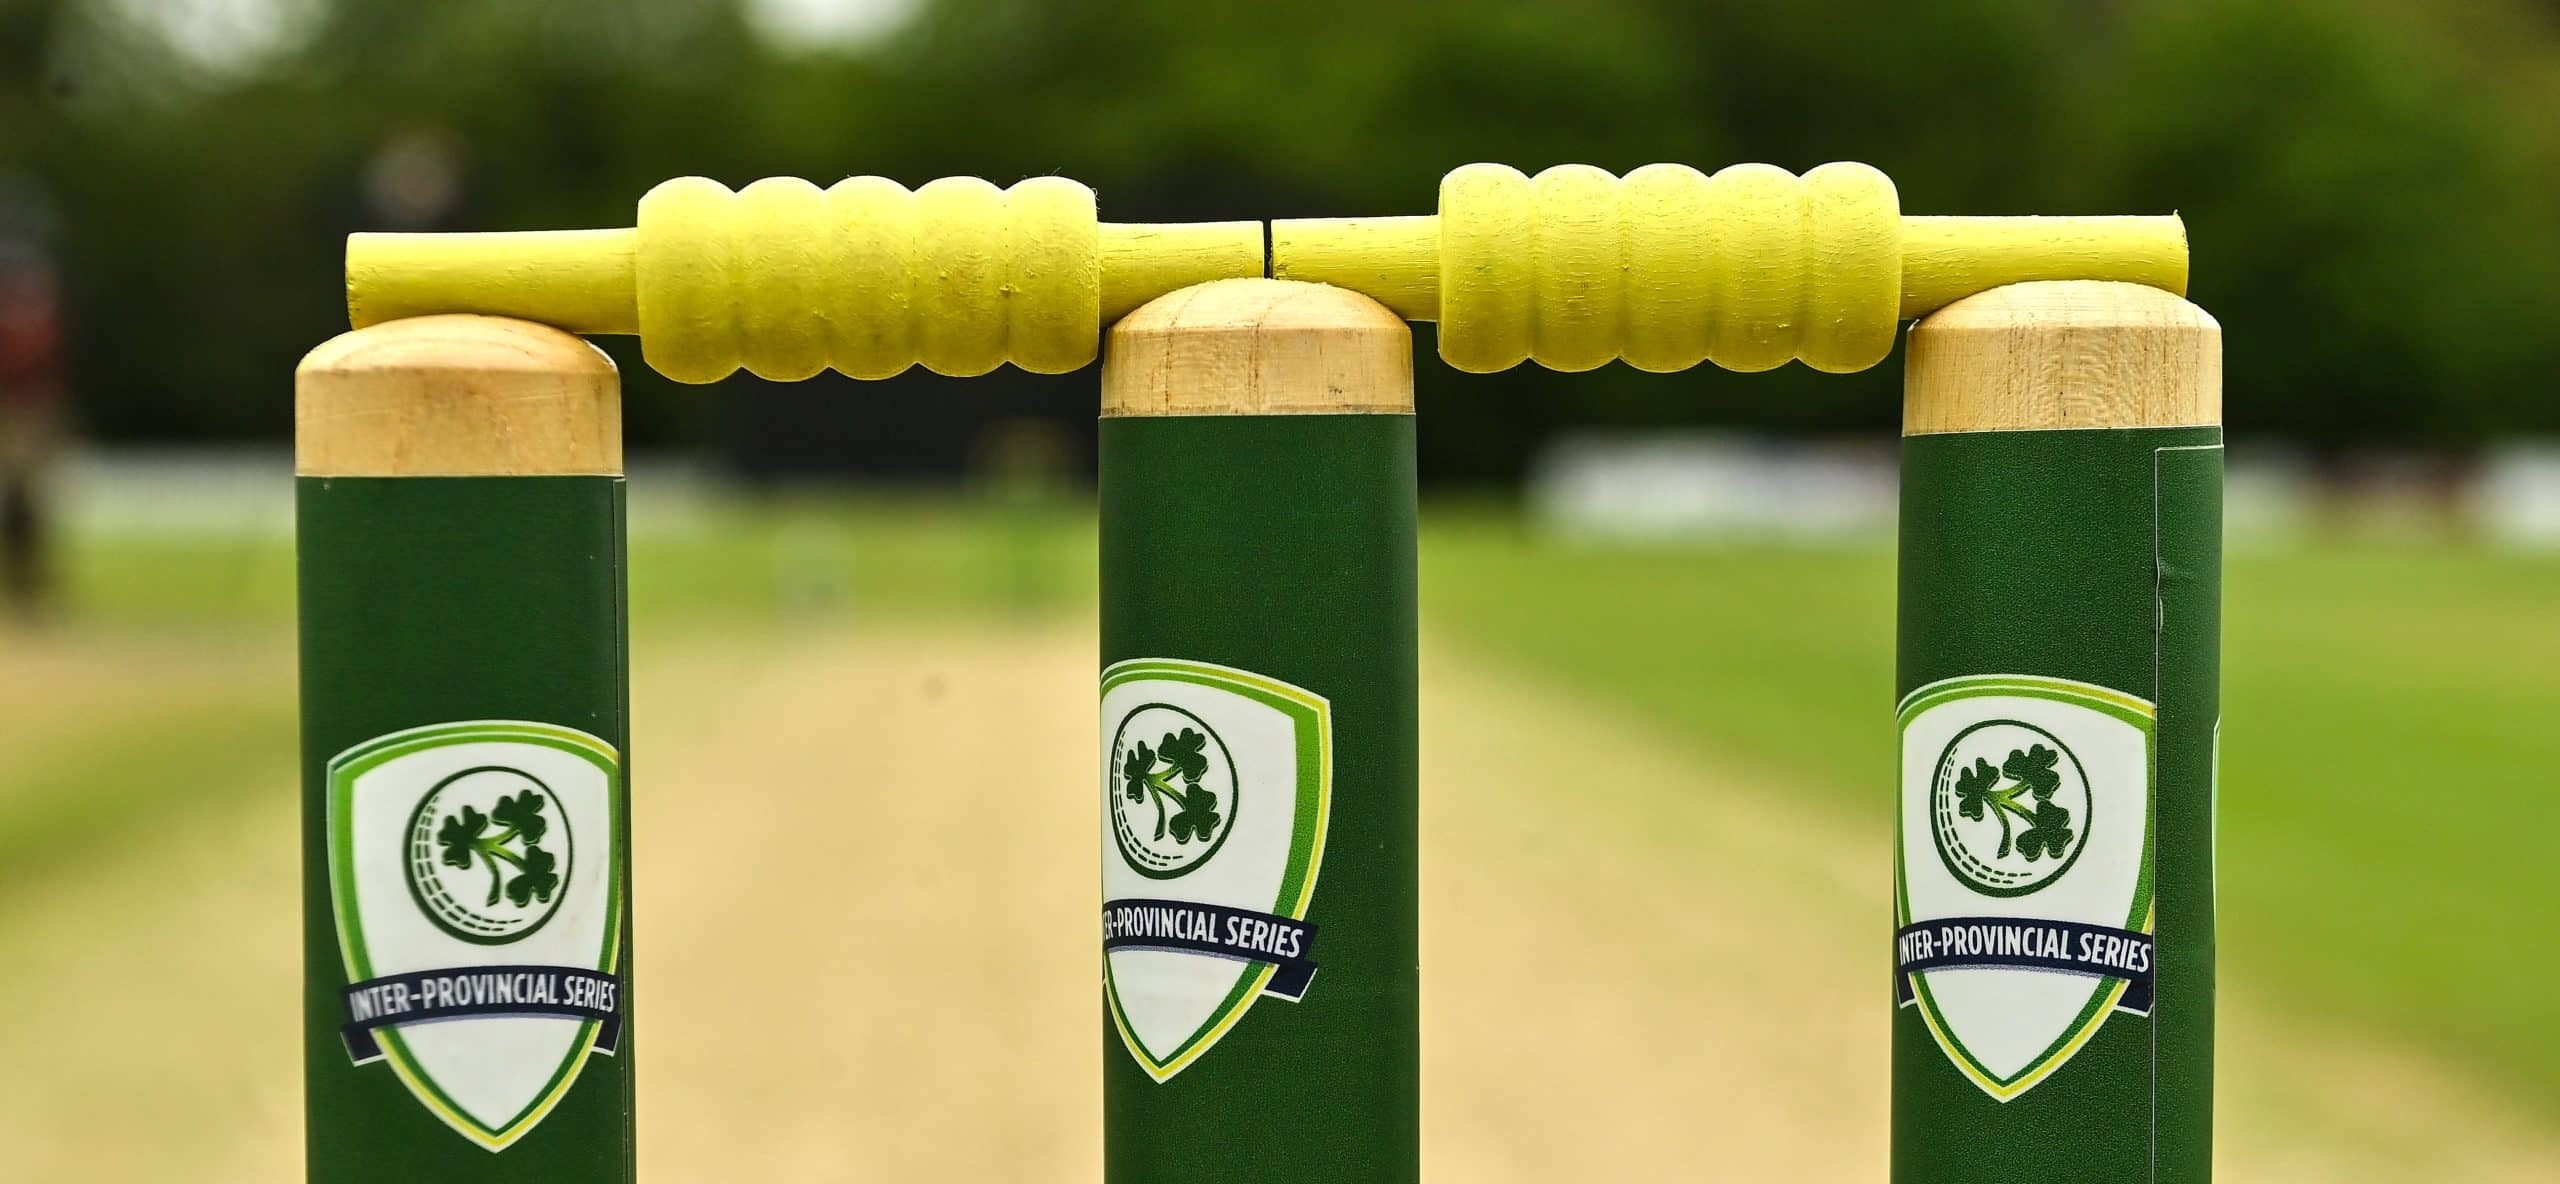 Cricket stumps and bails